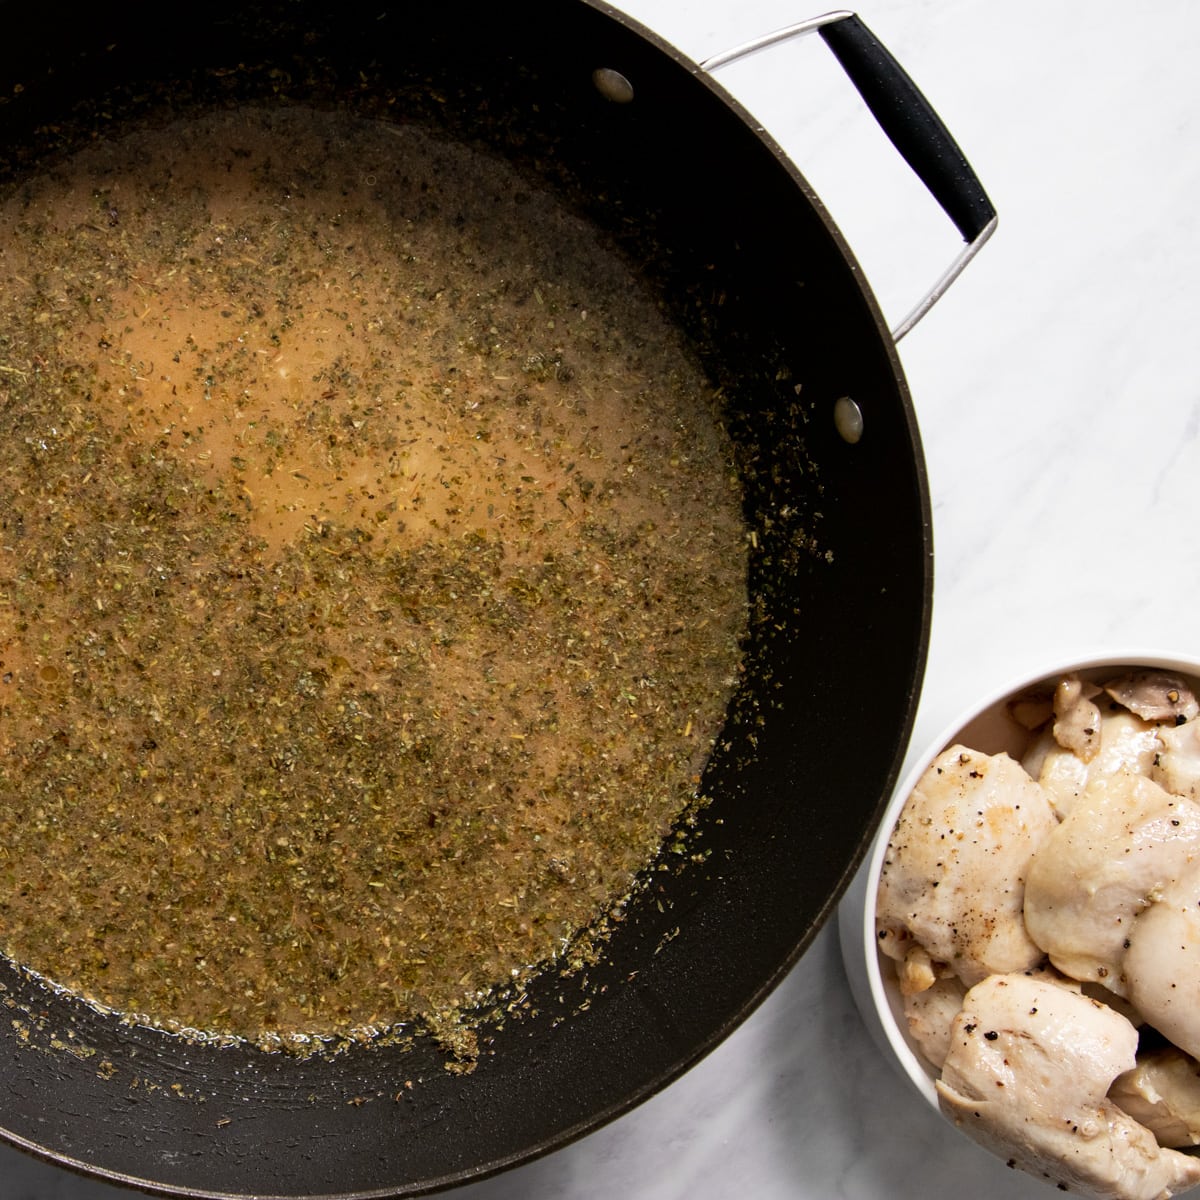 On the left side of the image, a skillet contains rice, chicken broth, lemon juice and Italian seasoning. In the lower right corner, a bowl contains browned chicken thighs.